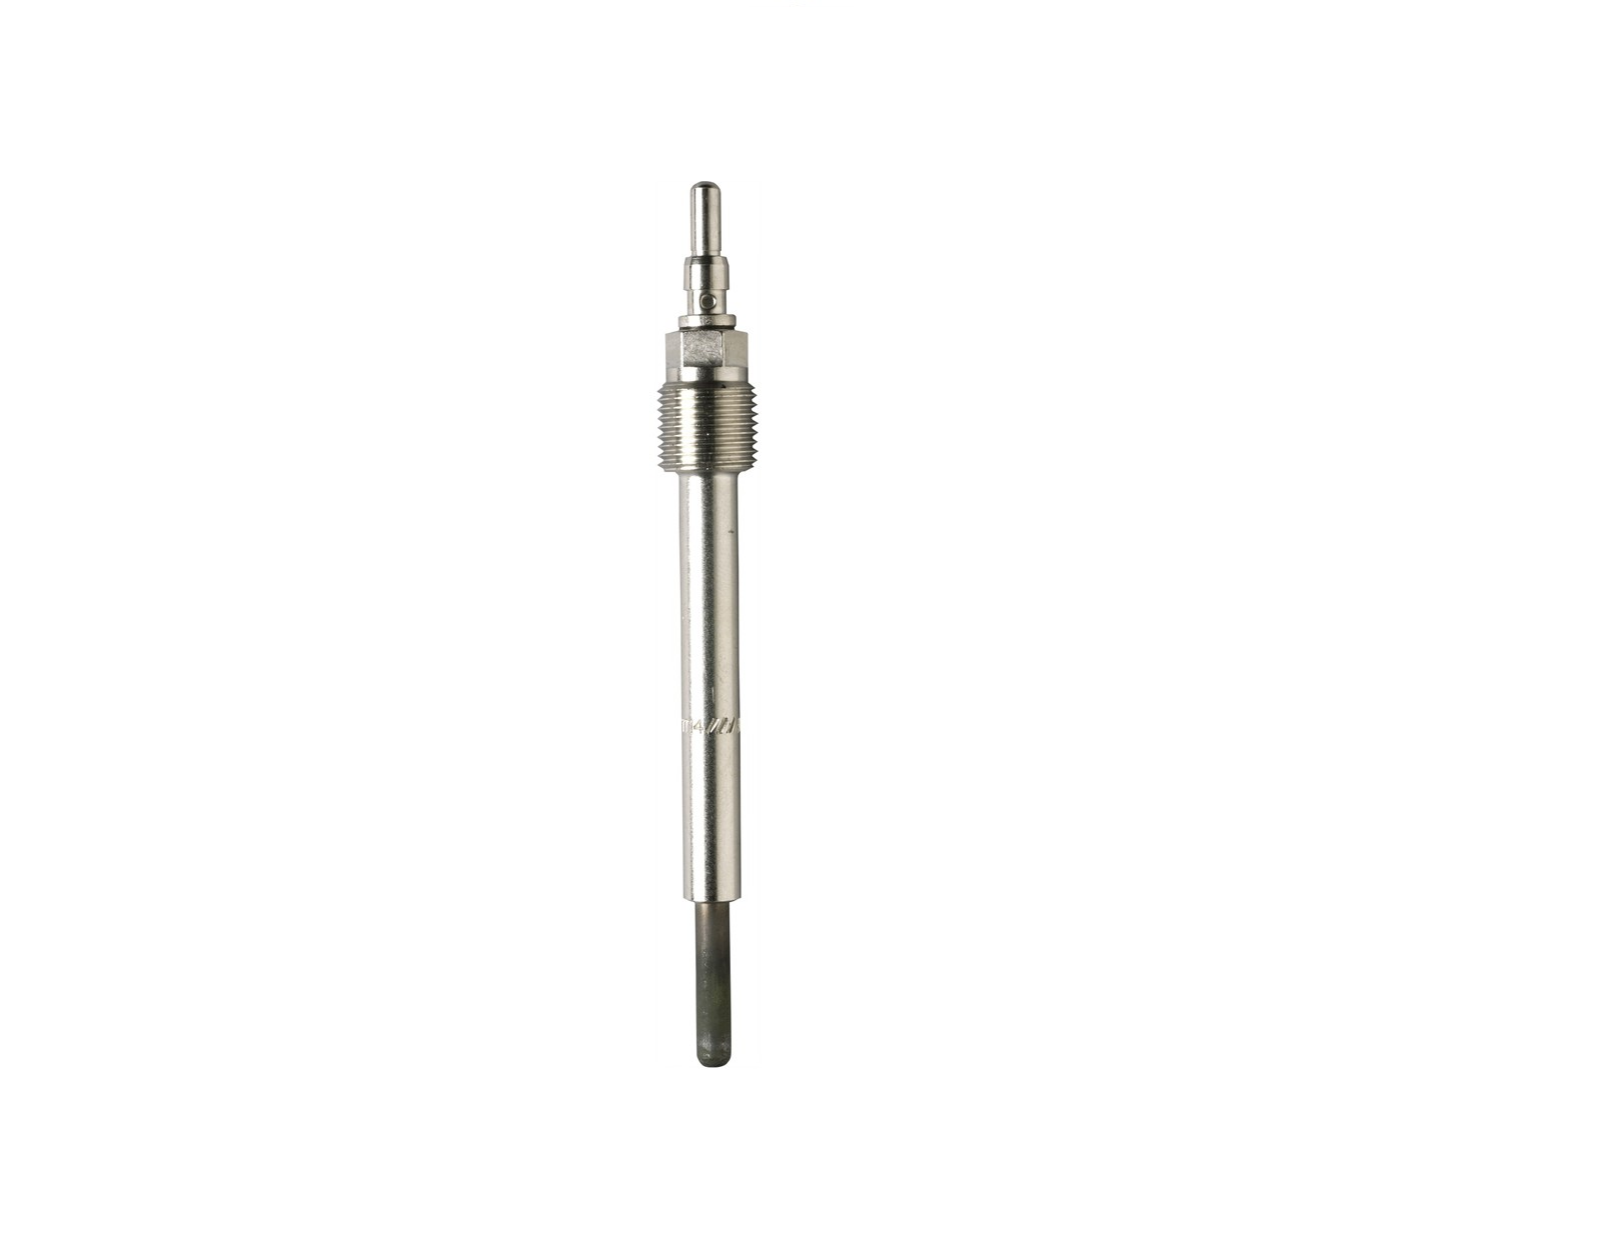 Ford Glow Plug 6.0 Powerstroke Production Date 9/24/03 Before F250,F350,F350,F450, F550